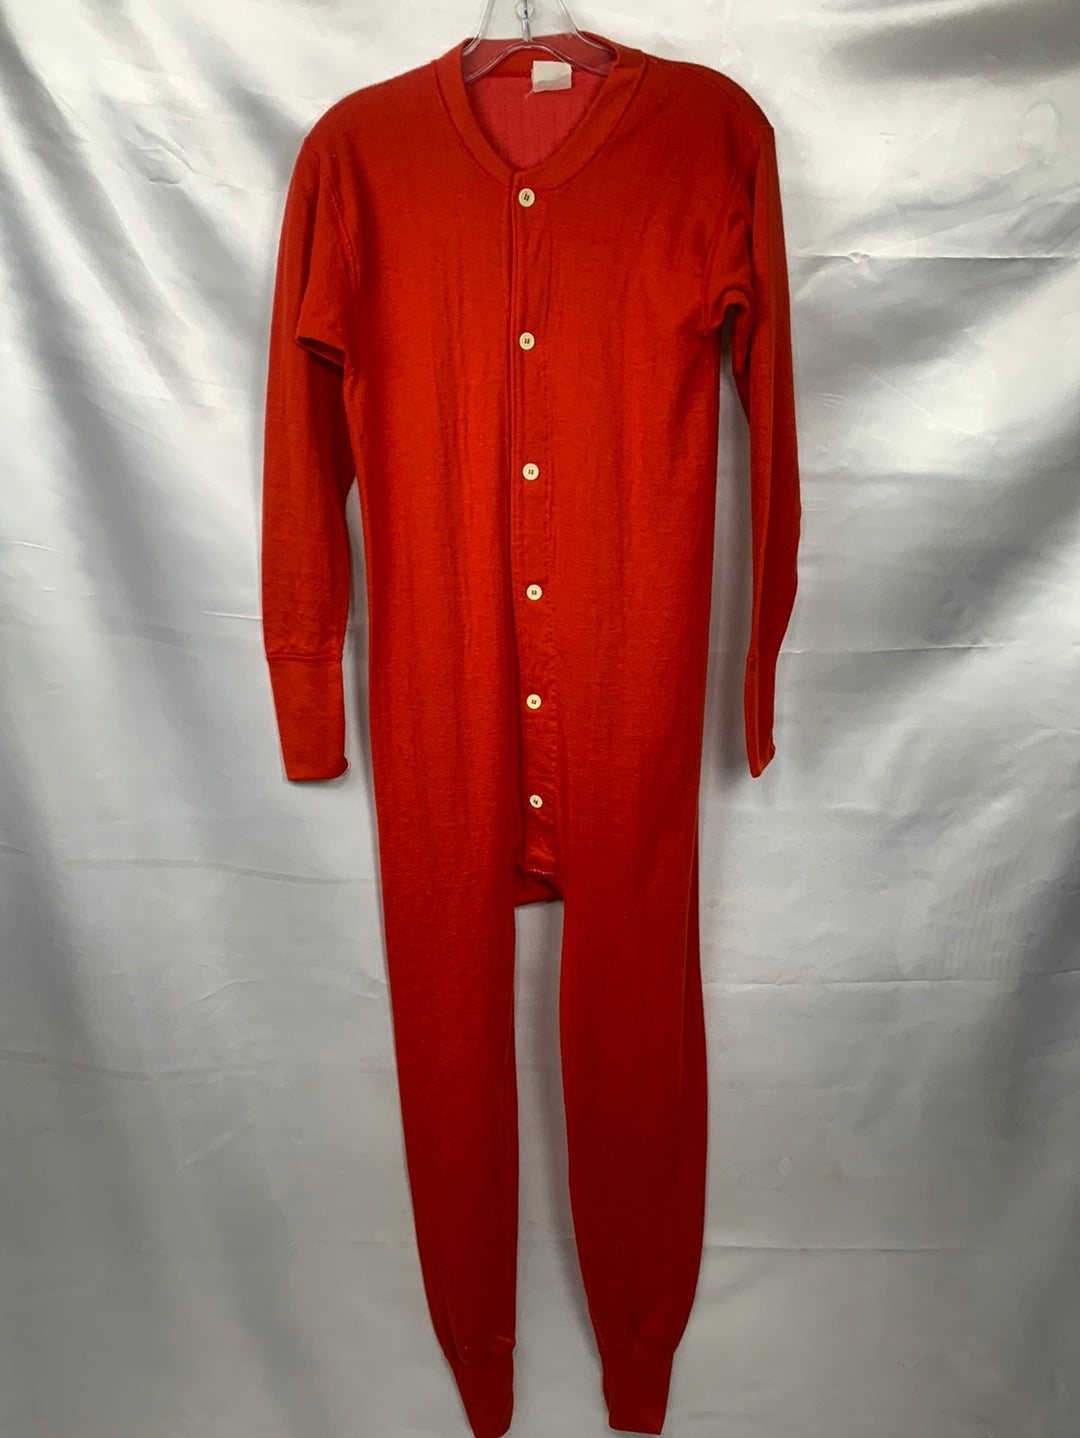 Union Suit Long Johns Thermal Underwear Mens 38 -40 Red – The Costume Party  & Dance Shop LLP